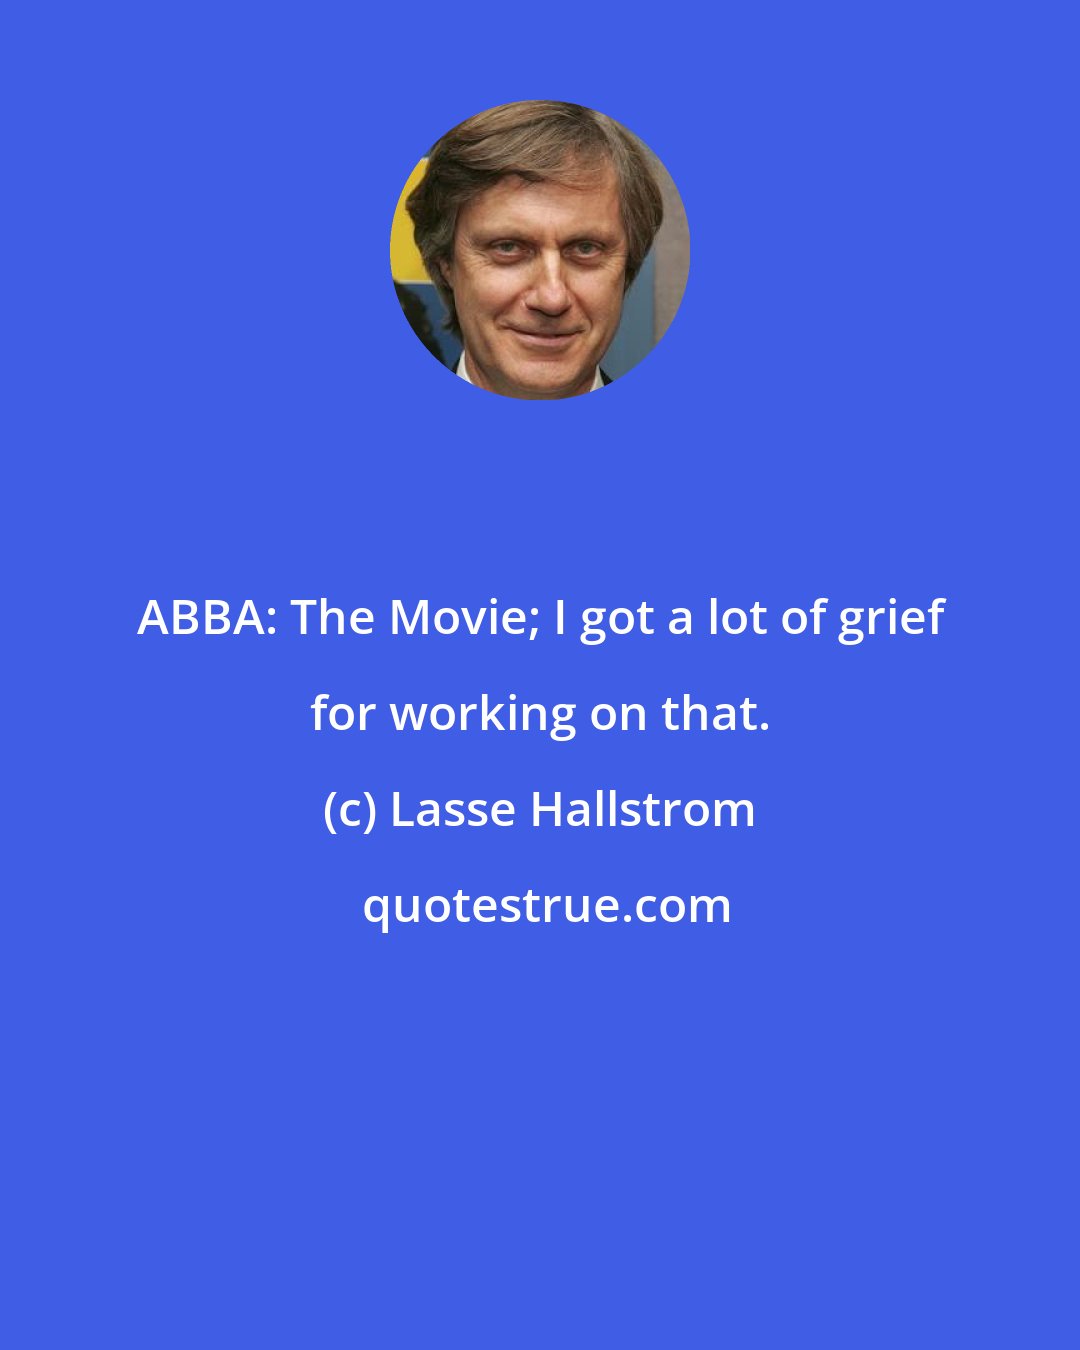 Lasse Hallstrom: ABBA: The Movie; I got a lot of grief for working on that.